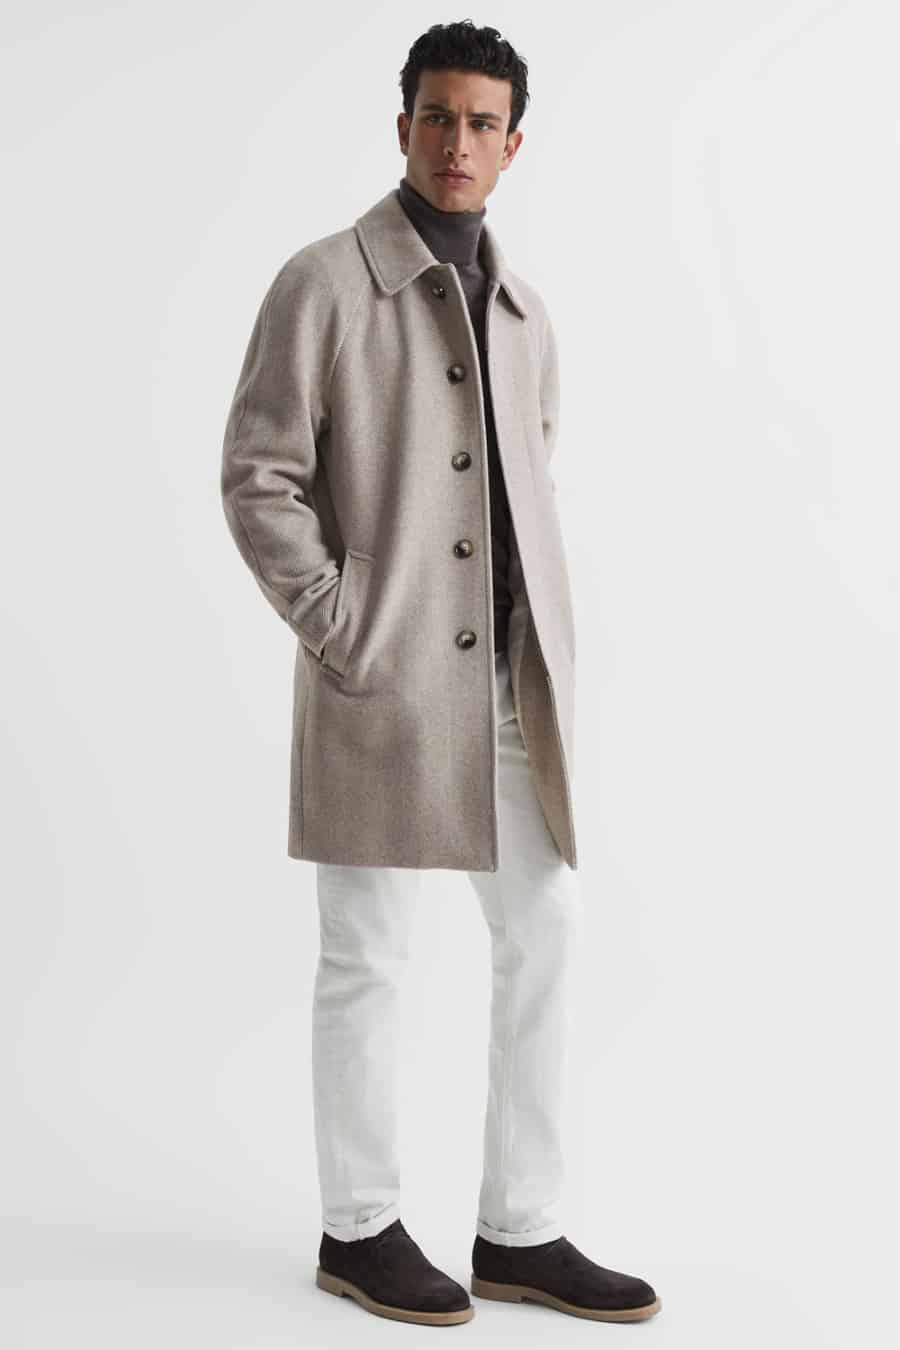 Men's white jeans, grey roll neck, beige overcoat and brown suede boots outfit